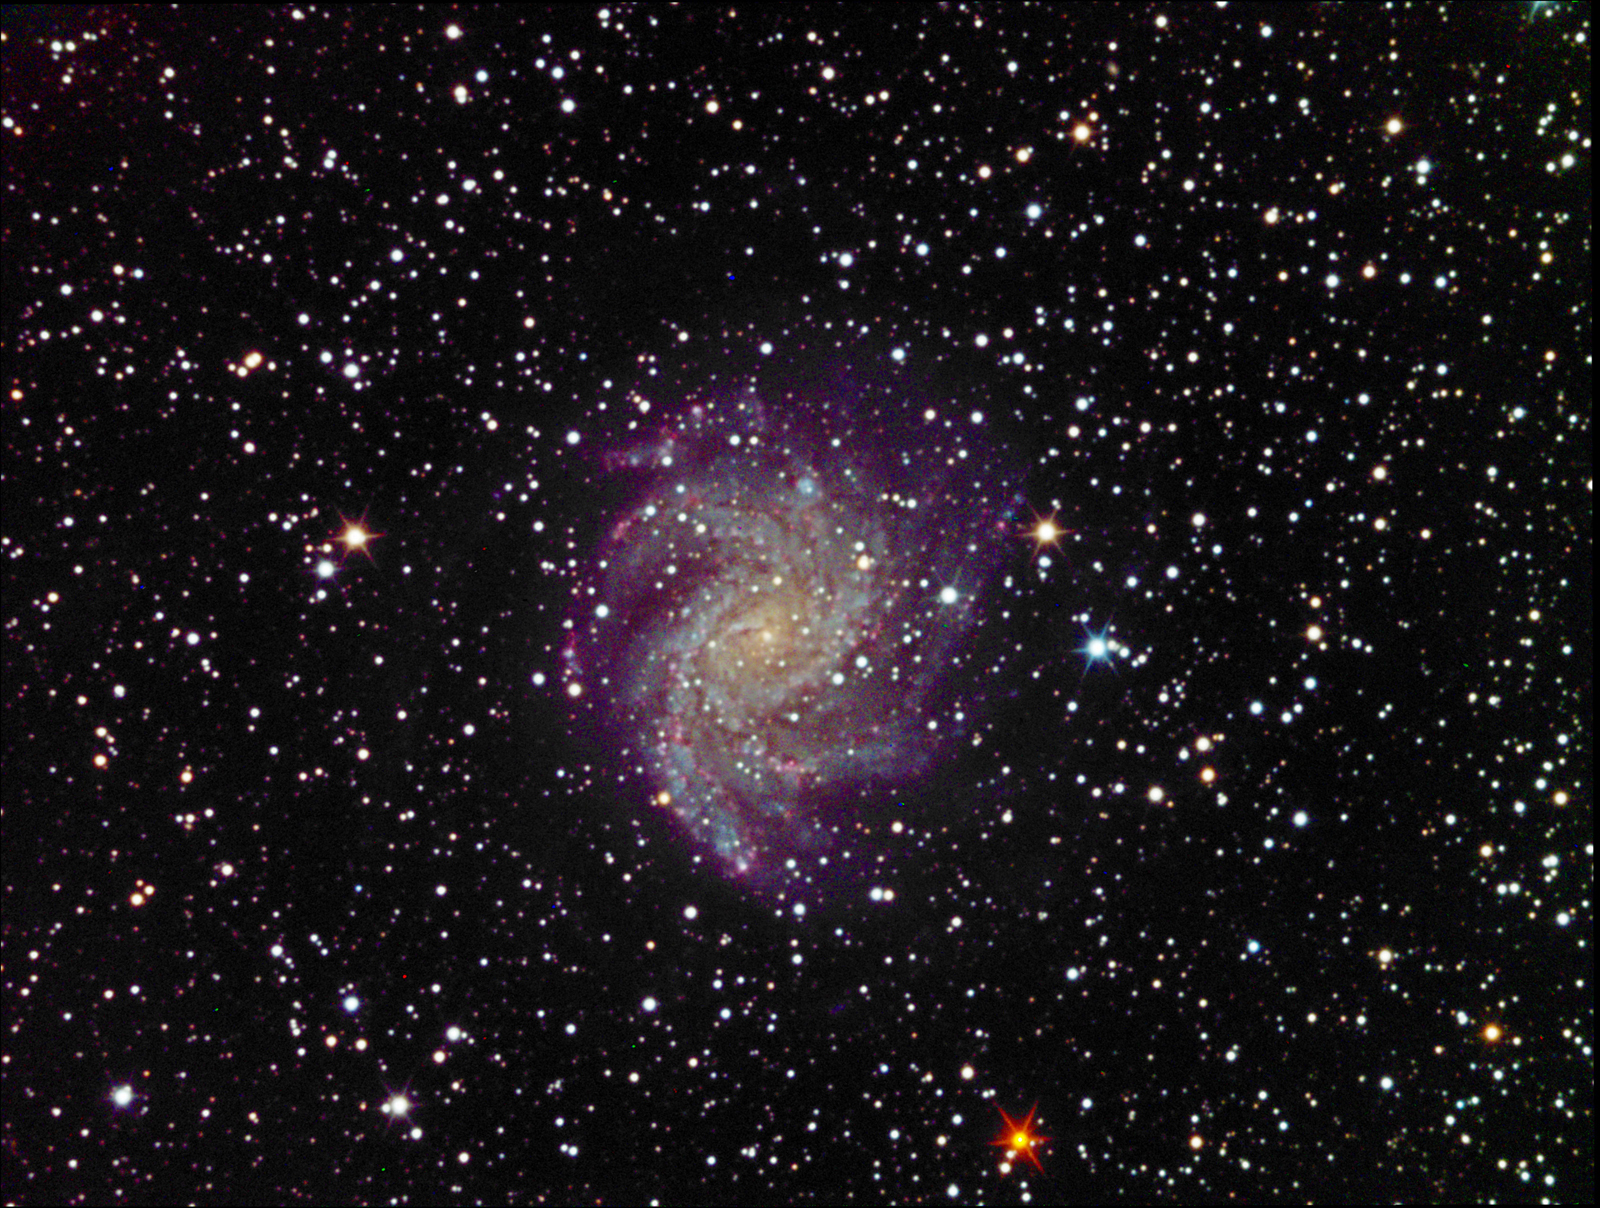 Group5--Don-Colton-NGC-6946-Fireworks-Galaxyw